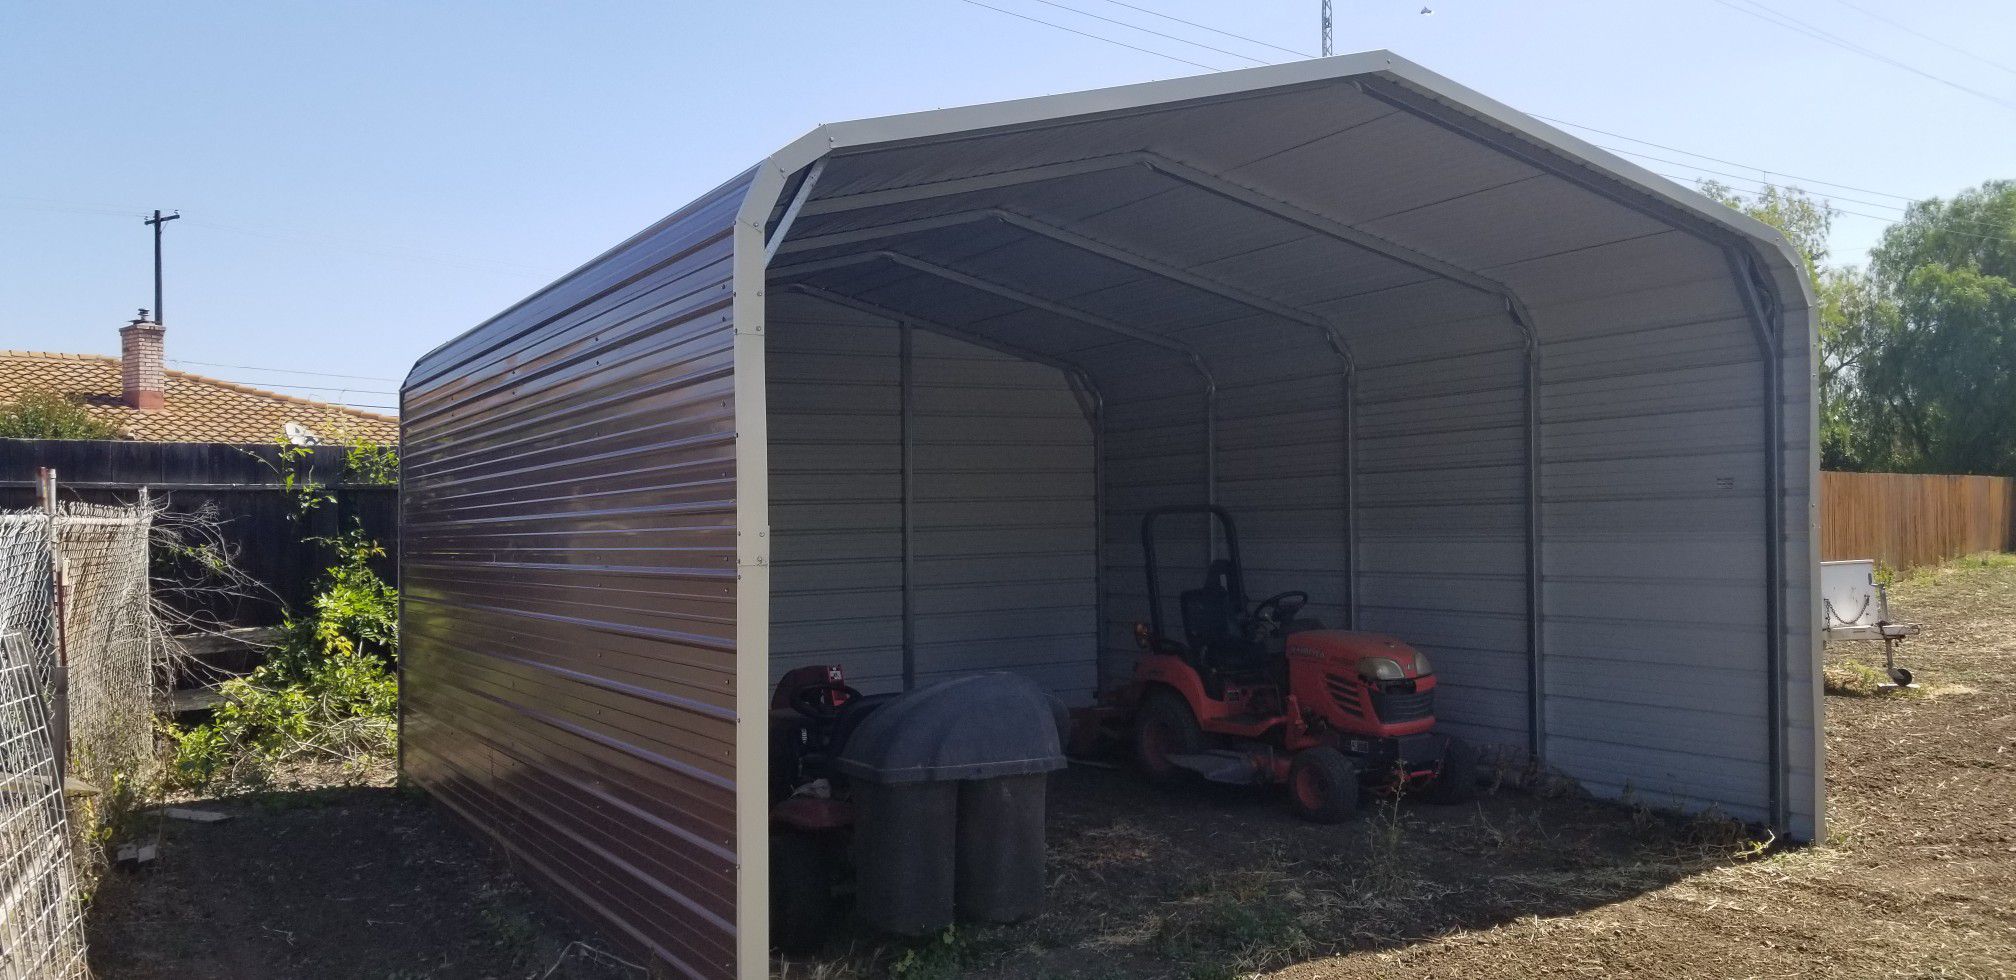 18'x21' shed. Less than 2 years old in like new condition. Comes with engineered drawings. You take down and transport. $3,000